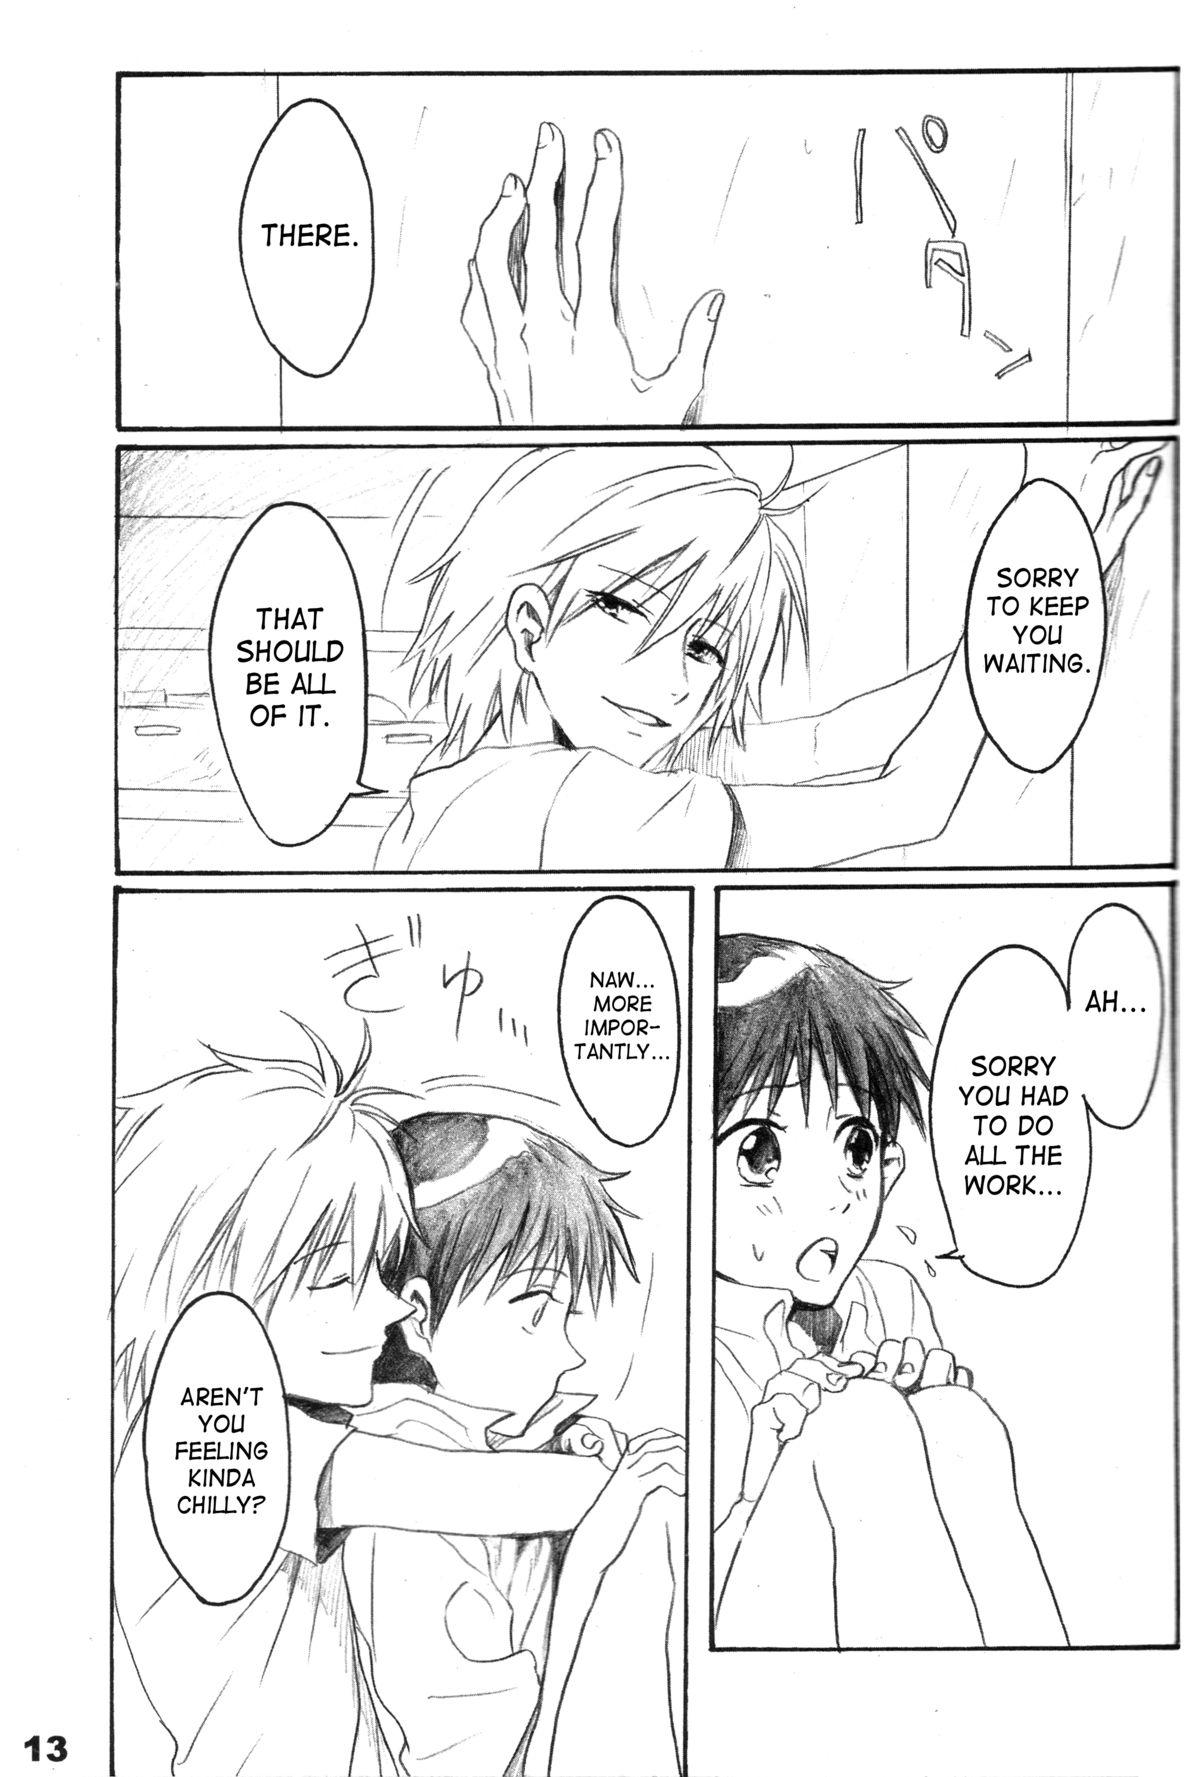 Job Urunda Me de Emono wo Miru na | Dont Look At Your Prey With Bleary Eyes - Neon genesis evangelion Thuylinh - Page 12